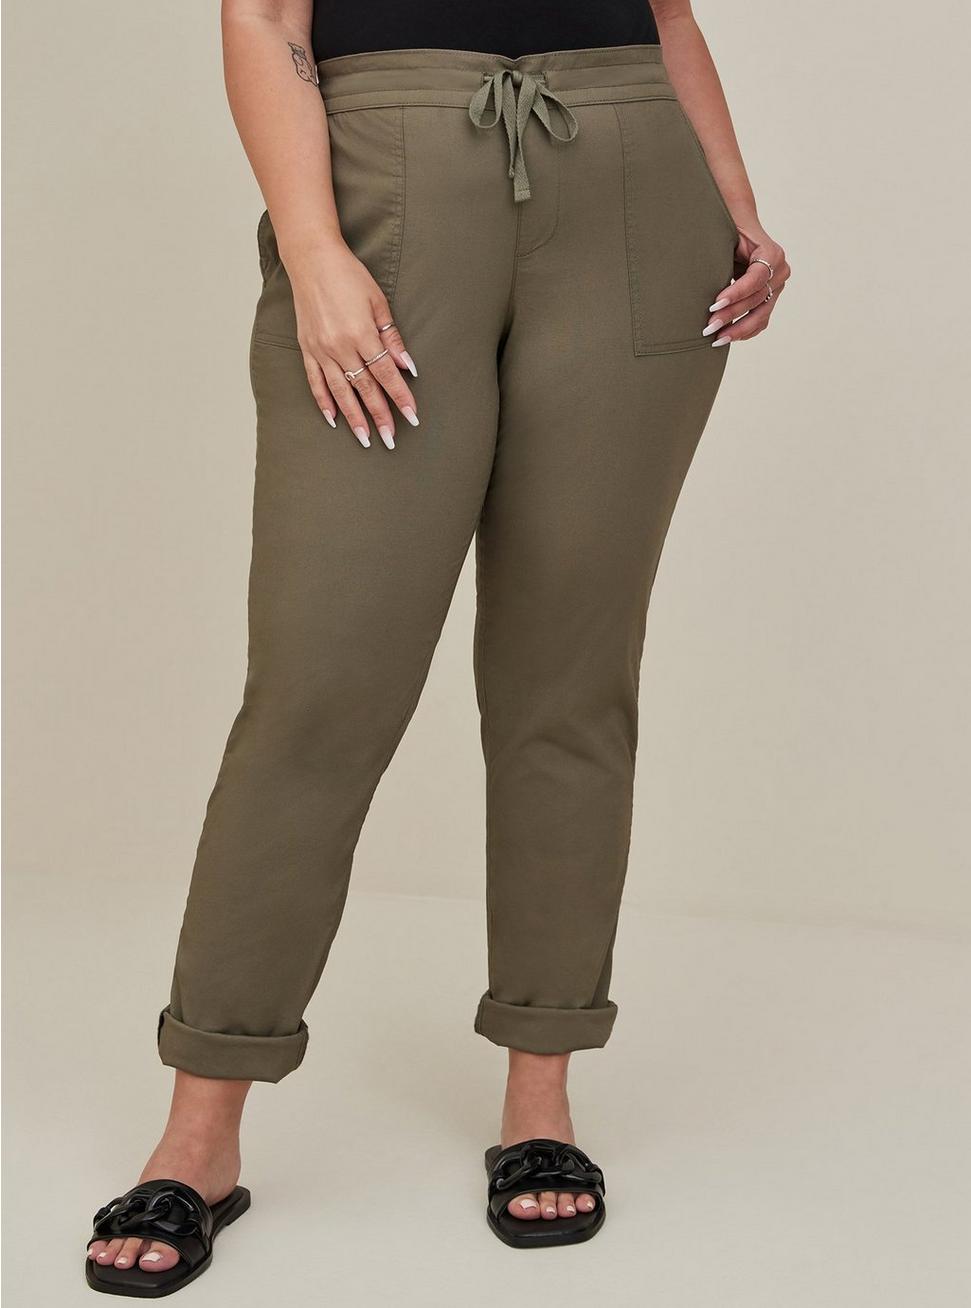 Pull-On Straight Stretch Poplin Mid-Rise Tie-Front Pant, DUSTY OLIVE, alternate